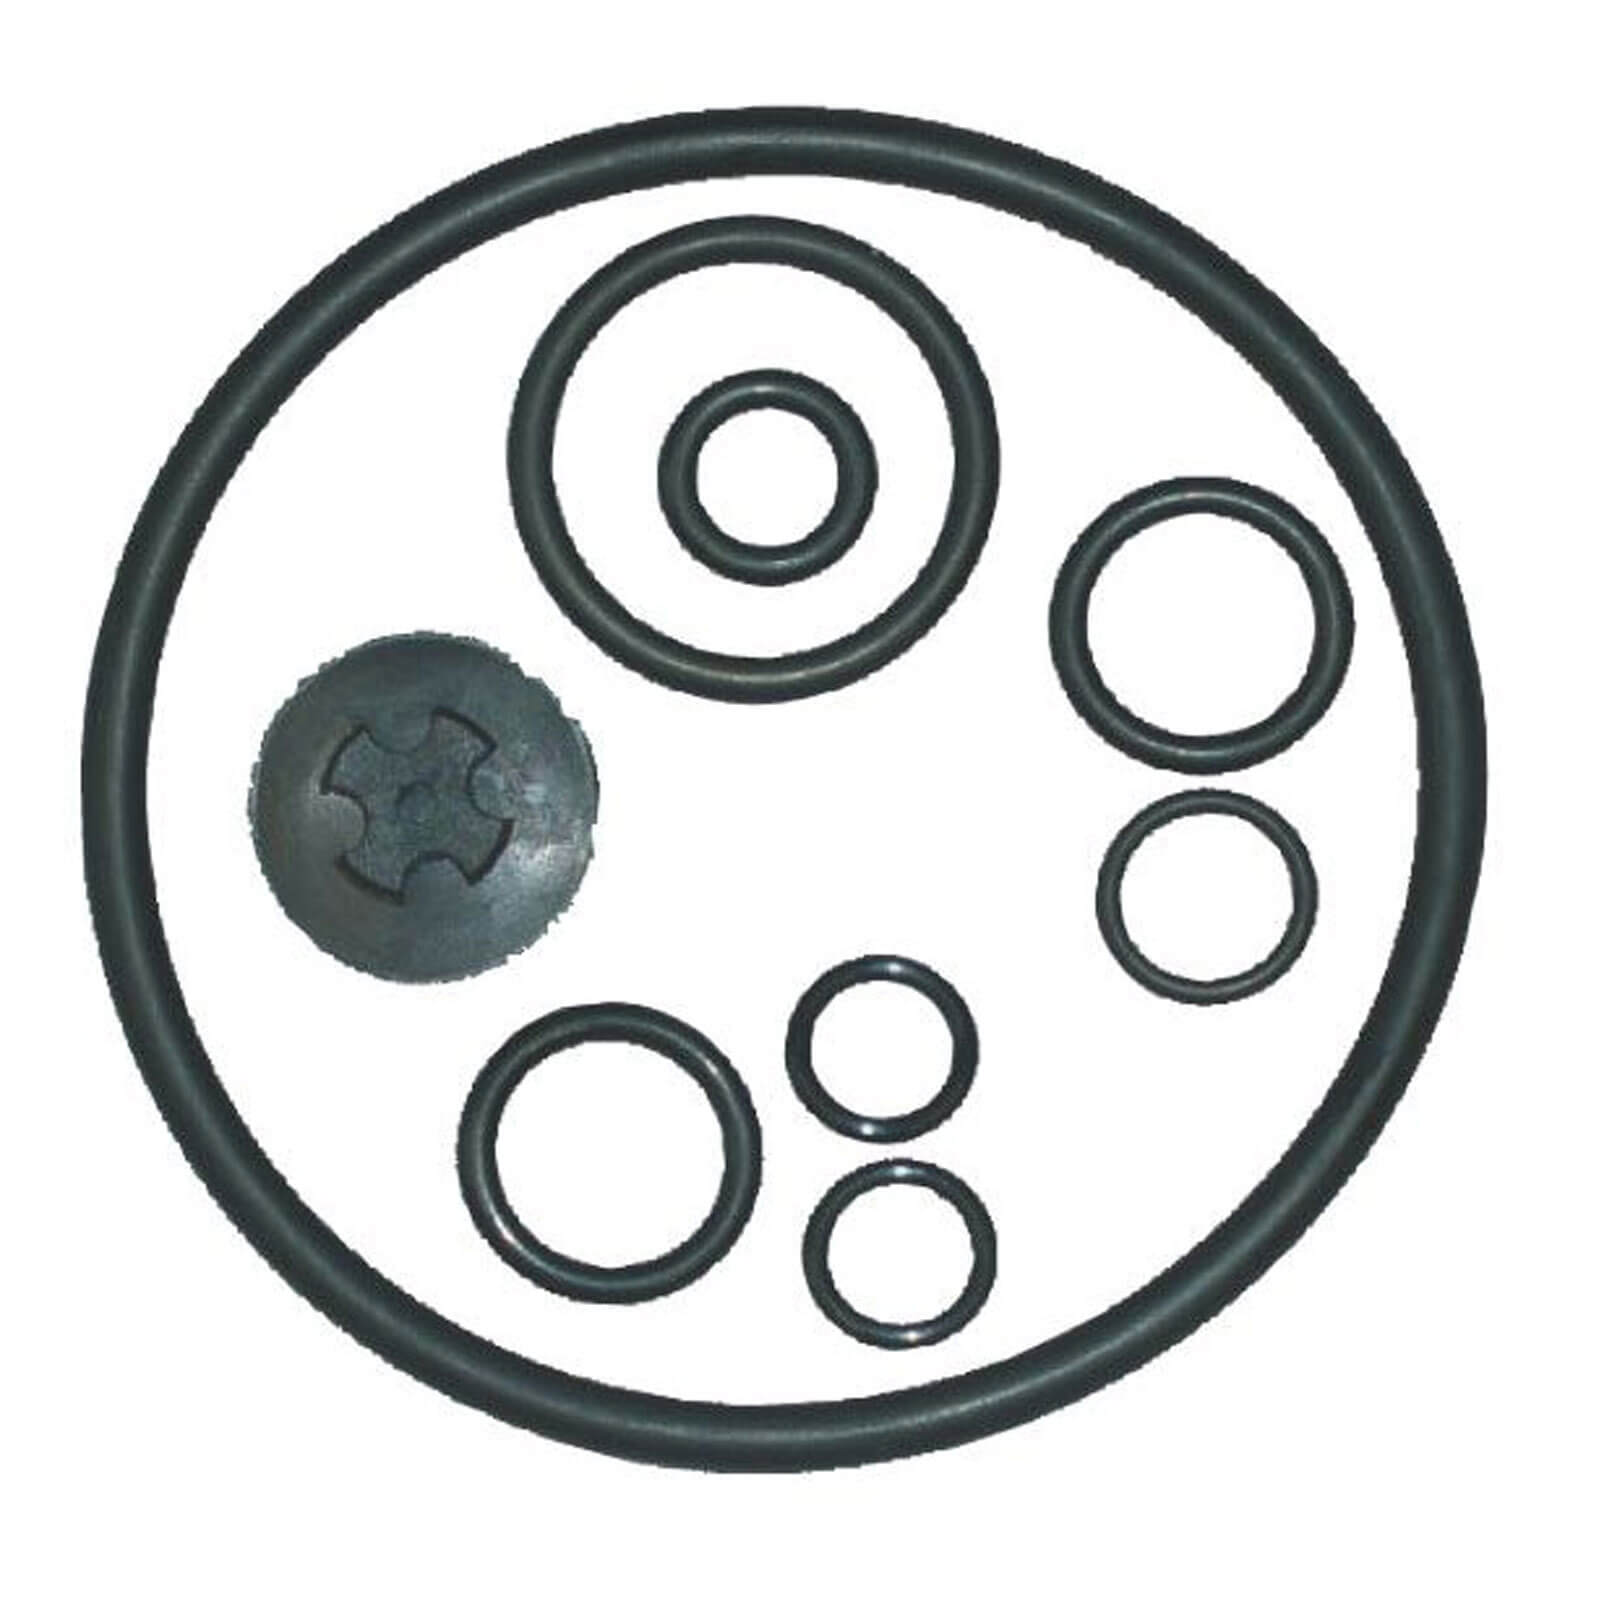 Photo of Solo Gasket Kit For 461-02- 462- 463 Pressure Sprayers